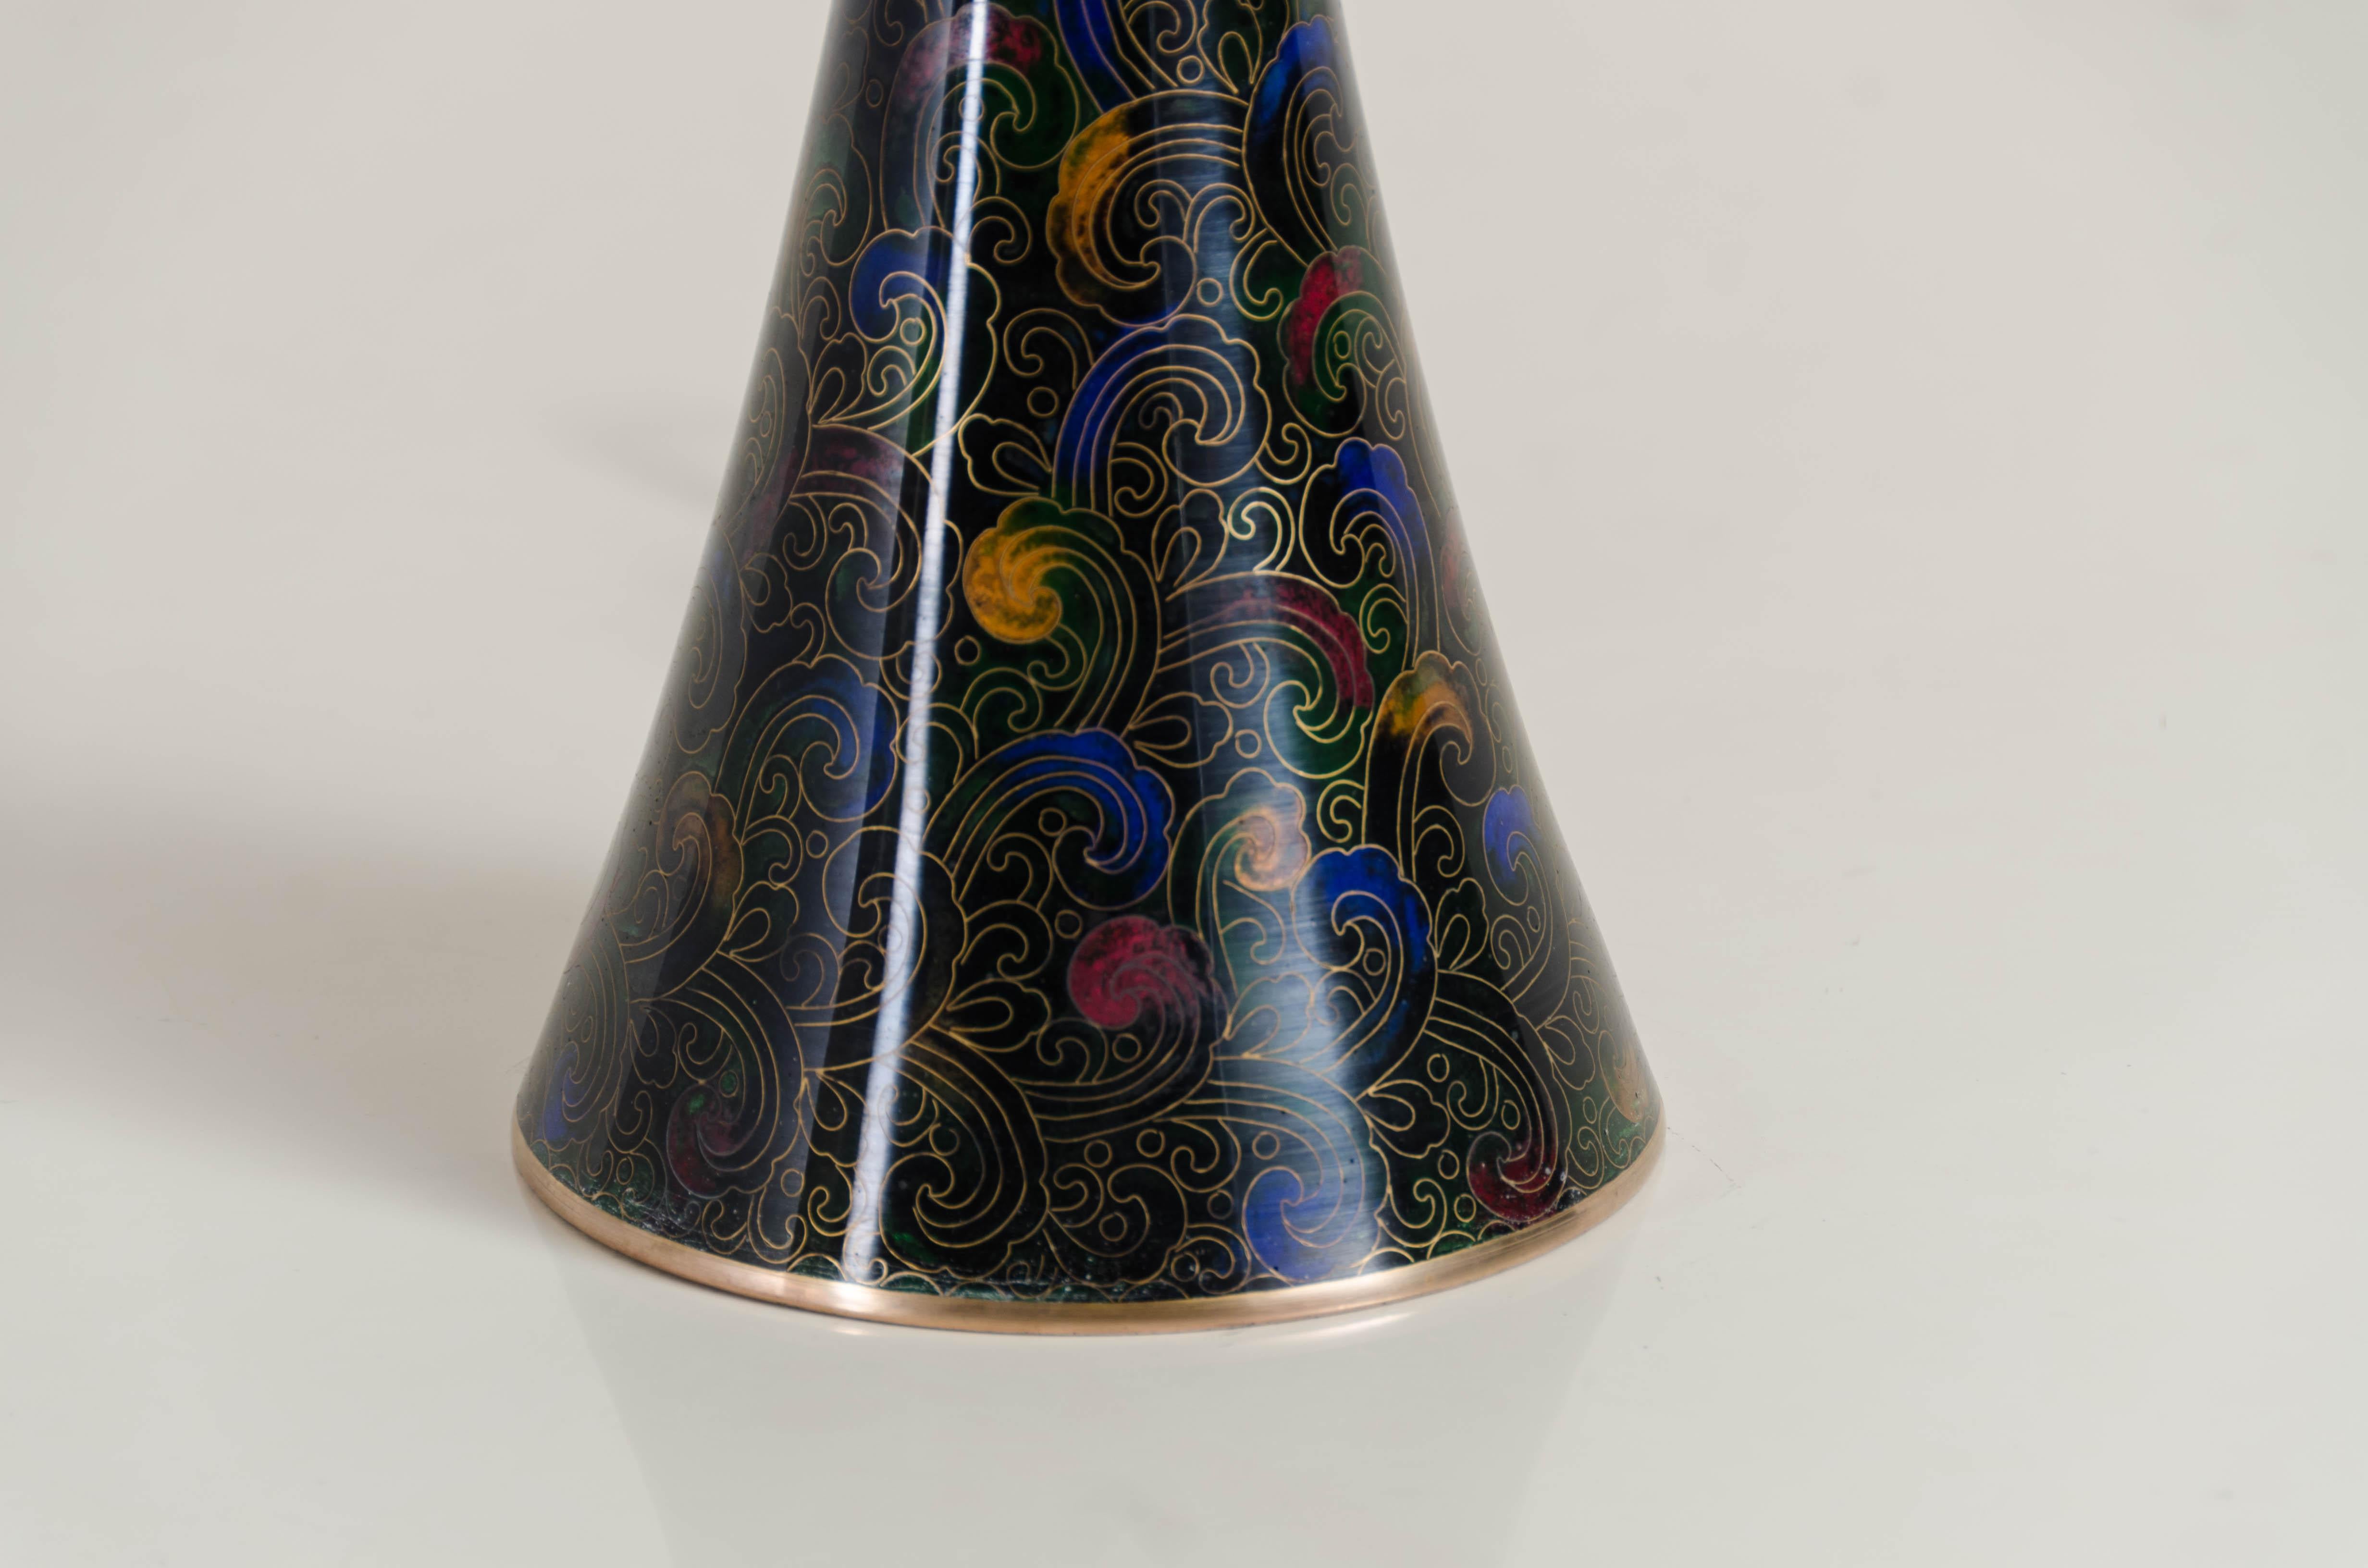 Cloissoné Coronet Lamp, Tang Grass Design, Cloisonné by Robert Kuo, Handmade, Limited For Sale